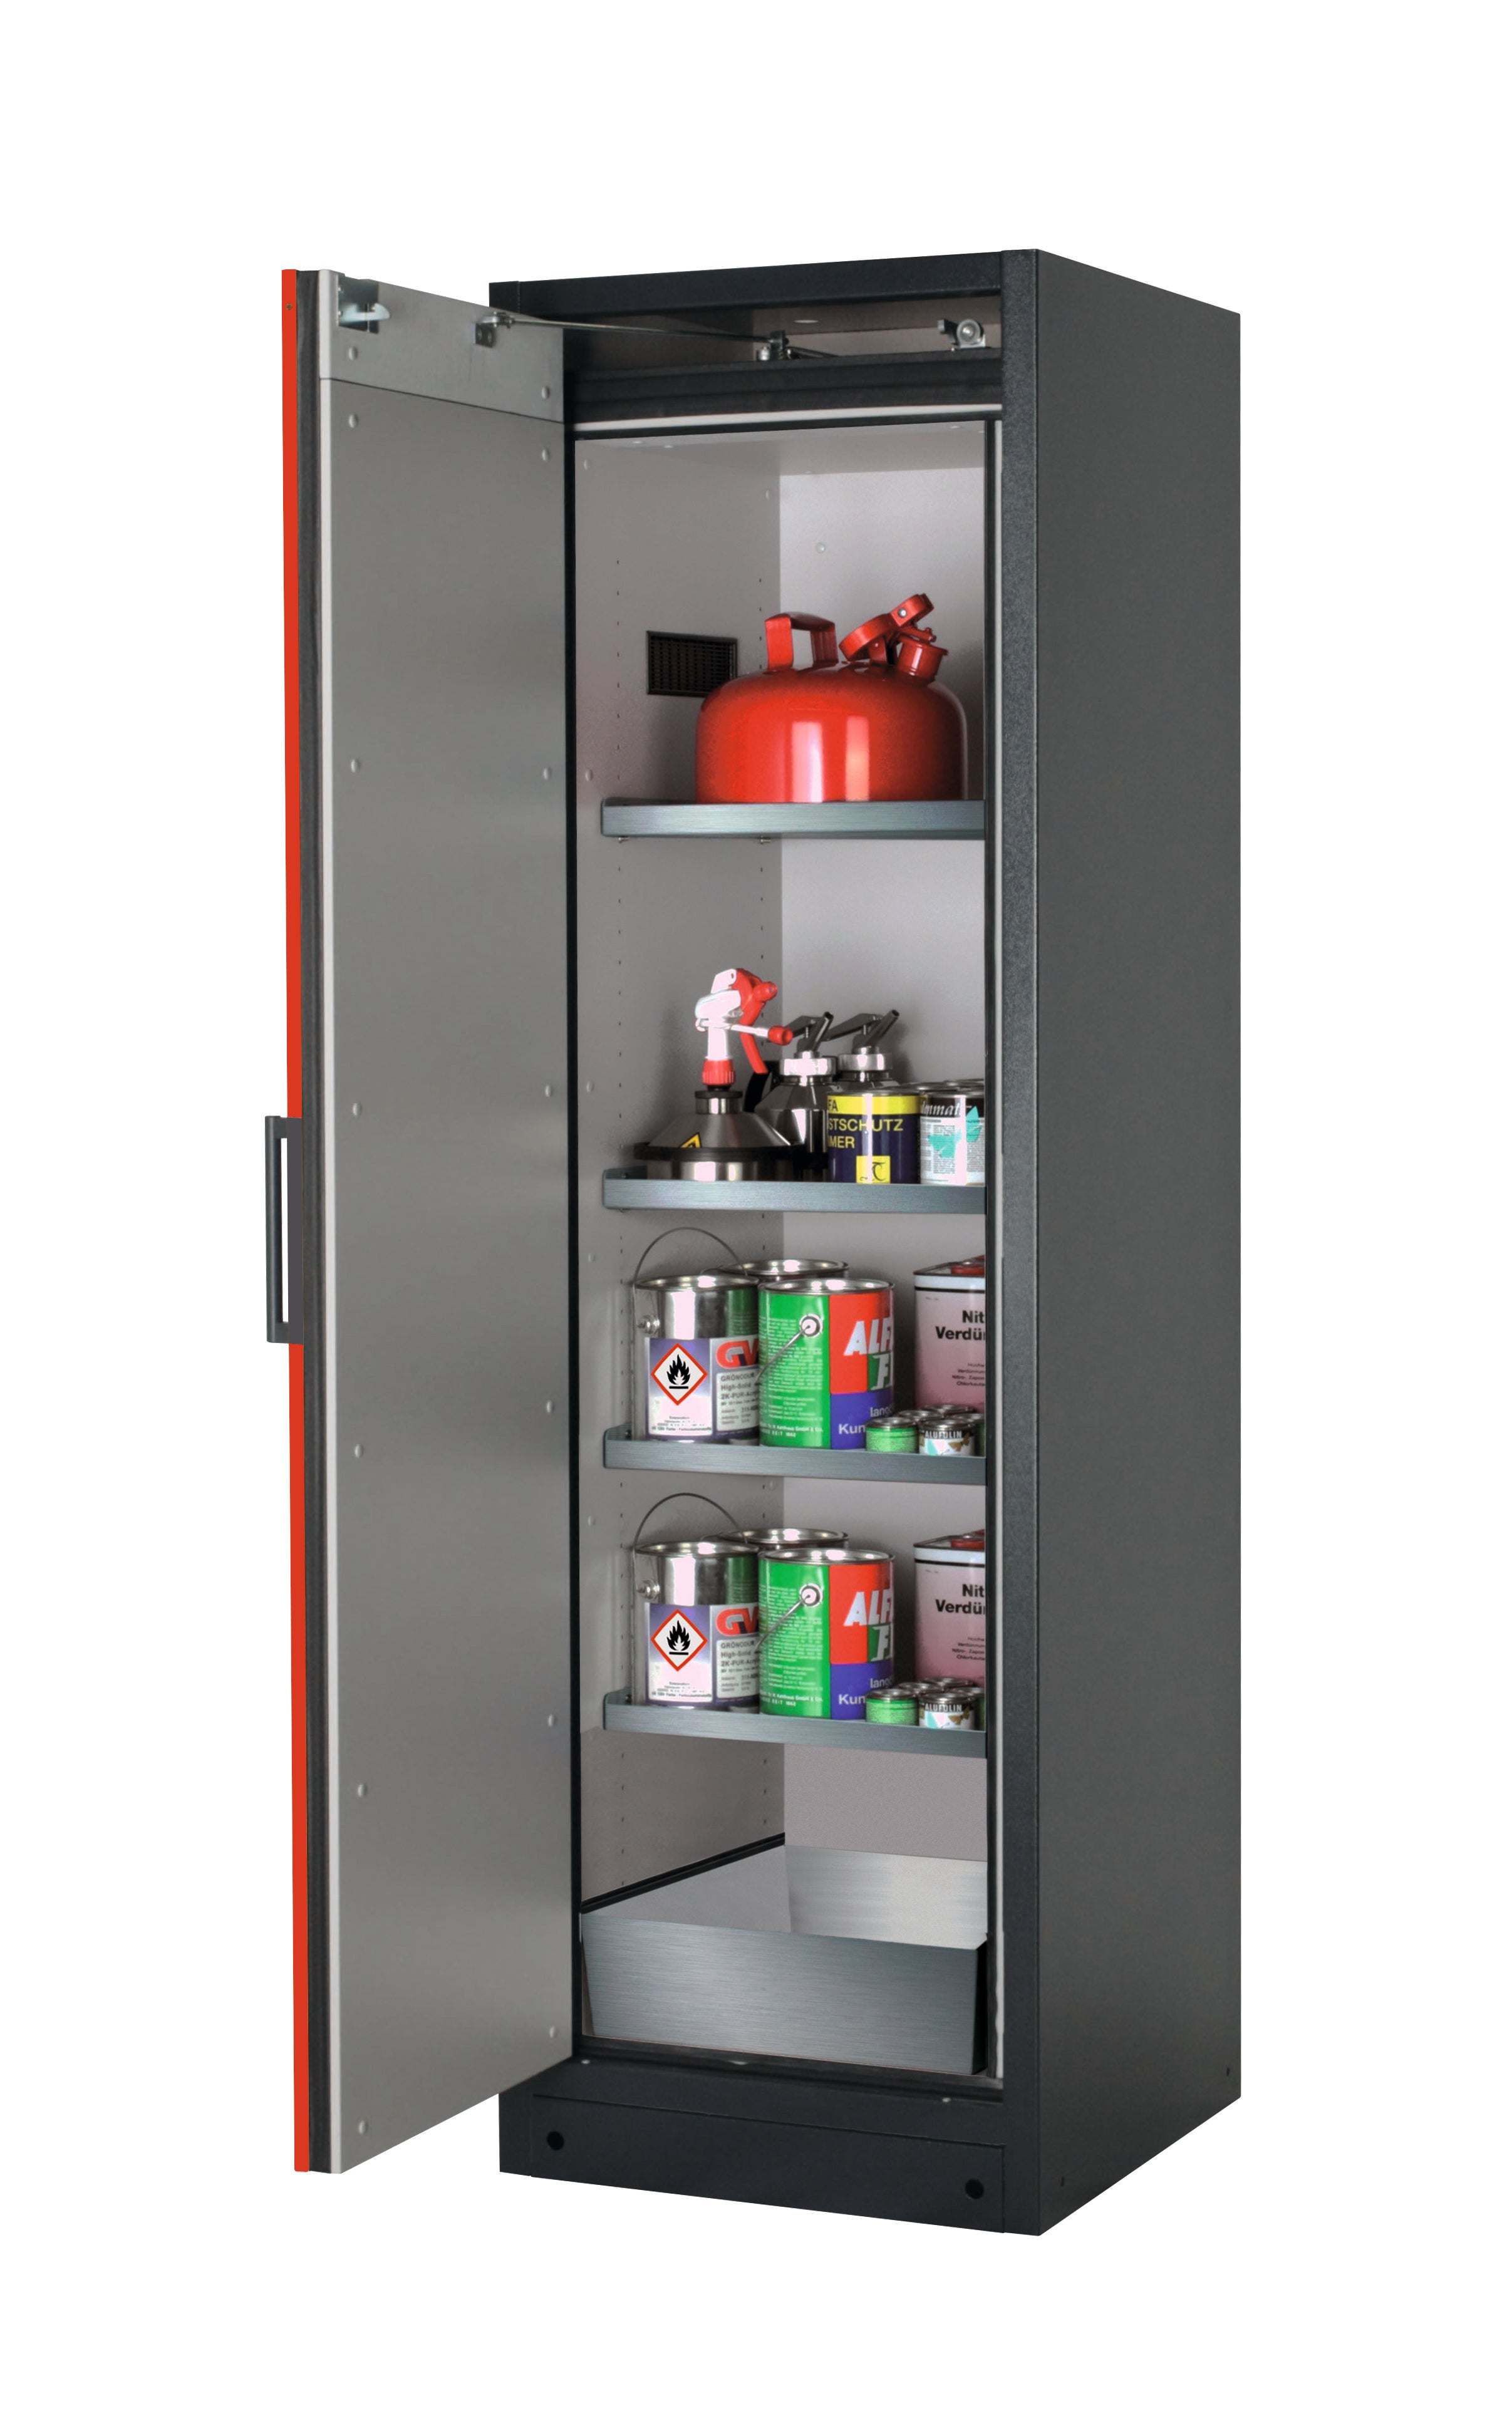 Type 90 safety storage cabinet Q-PEGASUS-90 model Q90.195.060.WDAC in traffic red RAL 3020 with 4x shelf standard (stainless steel 1.4301),